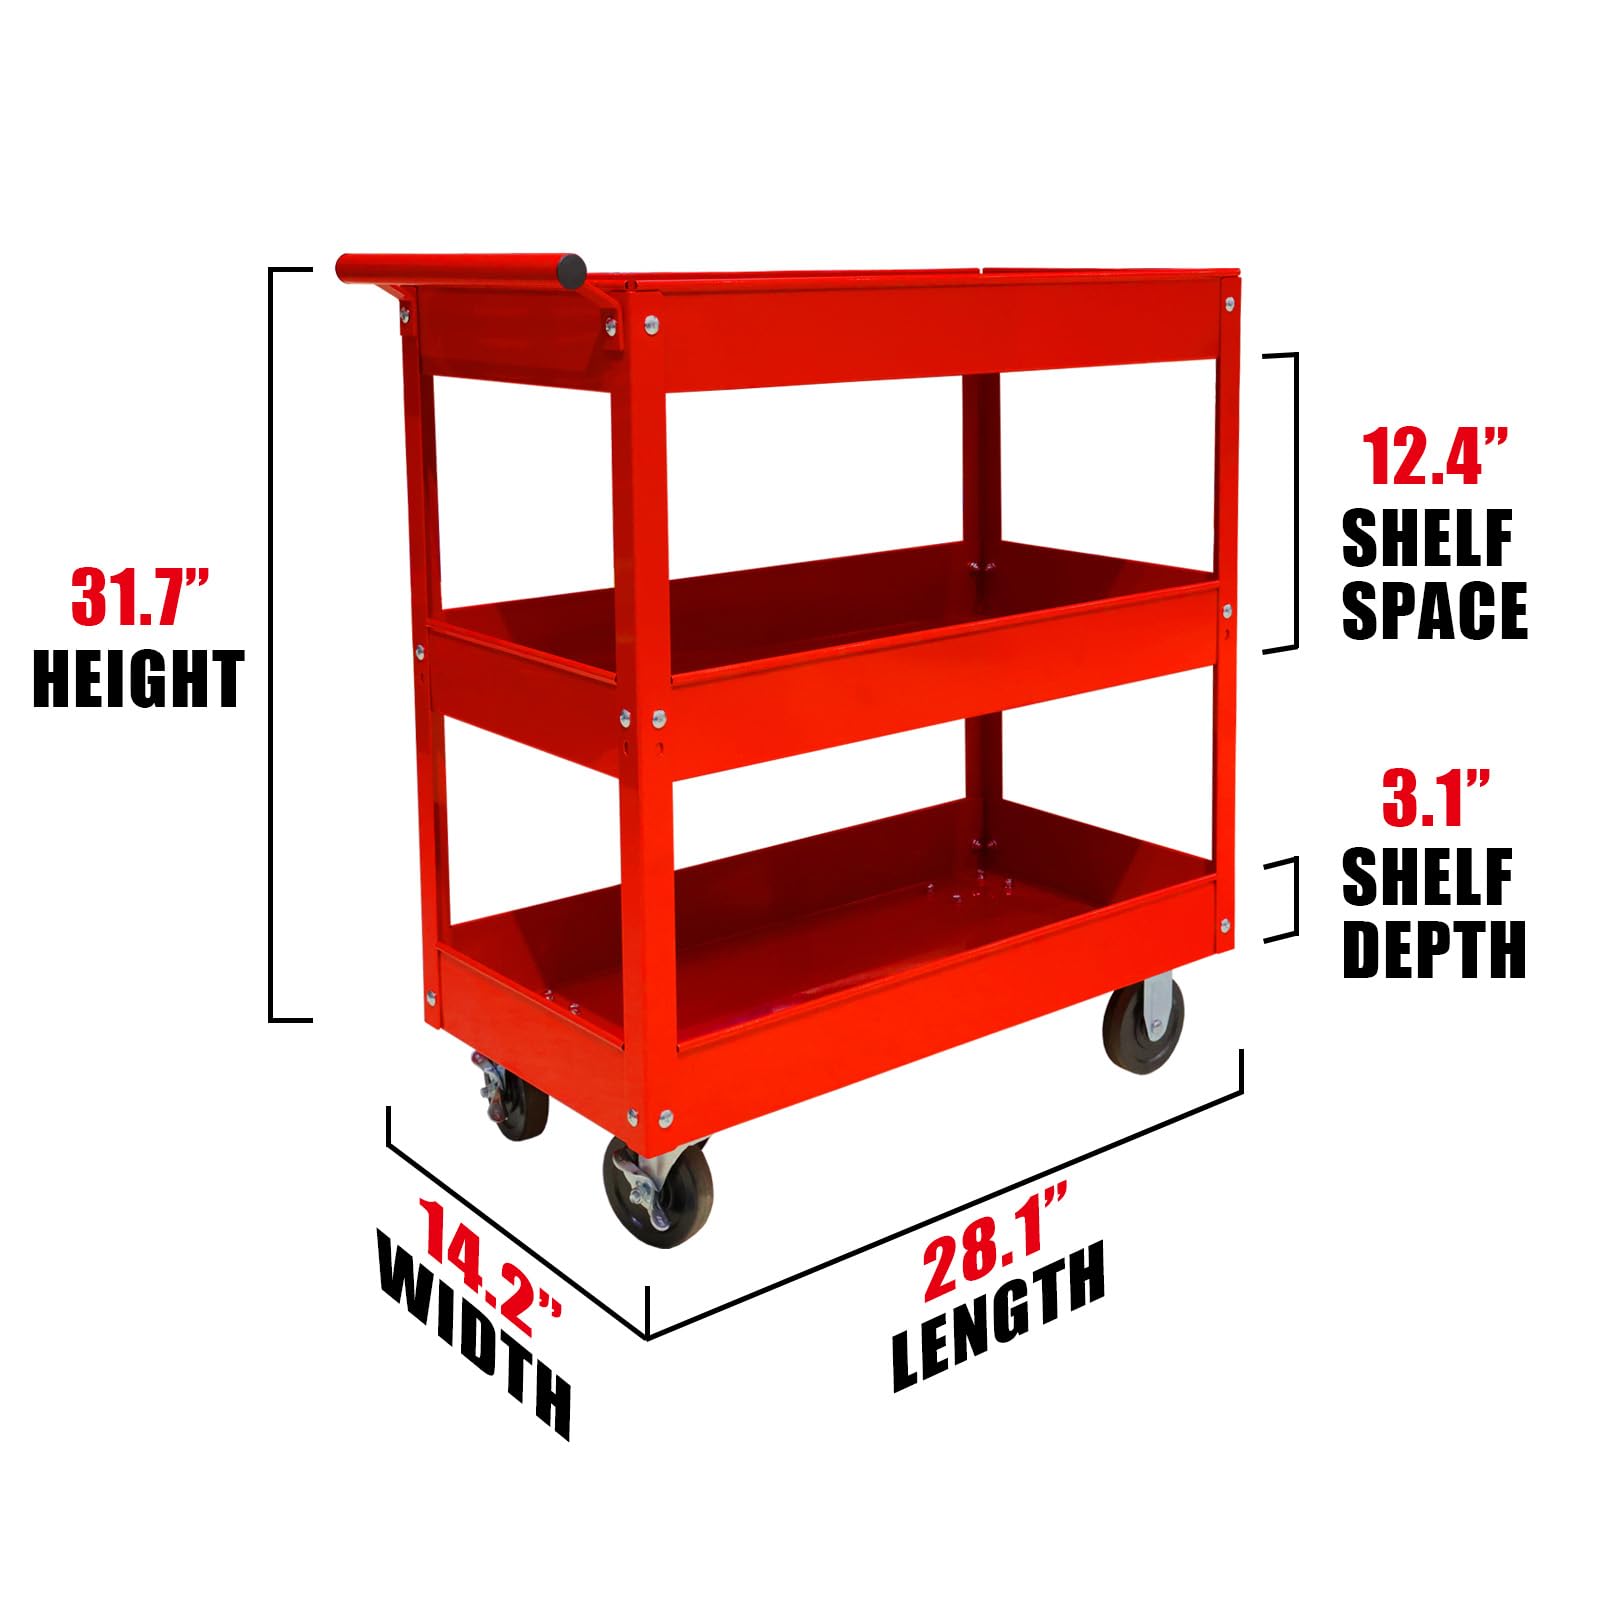 BIG RED 3-Tier Service Cart 400 lbs capacity metal cart on wheels For Garage Warehouse Workshop Use Stainless Steel Utility Cart,APTC302R,Torin